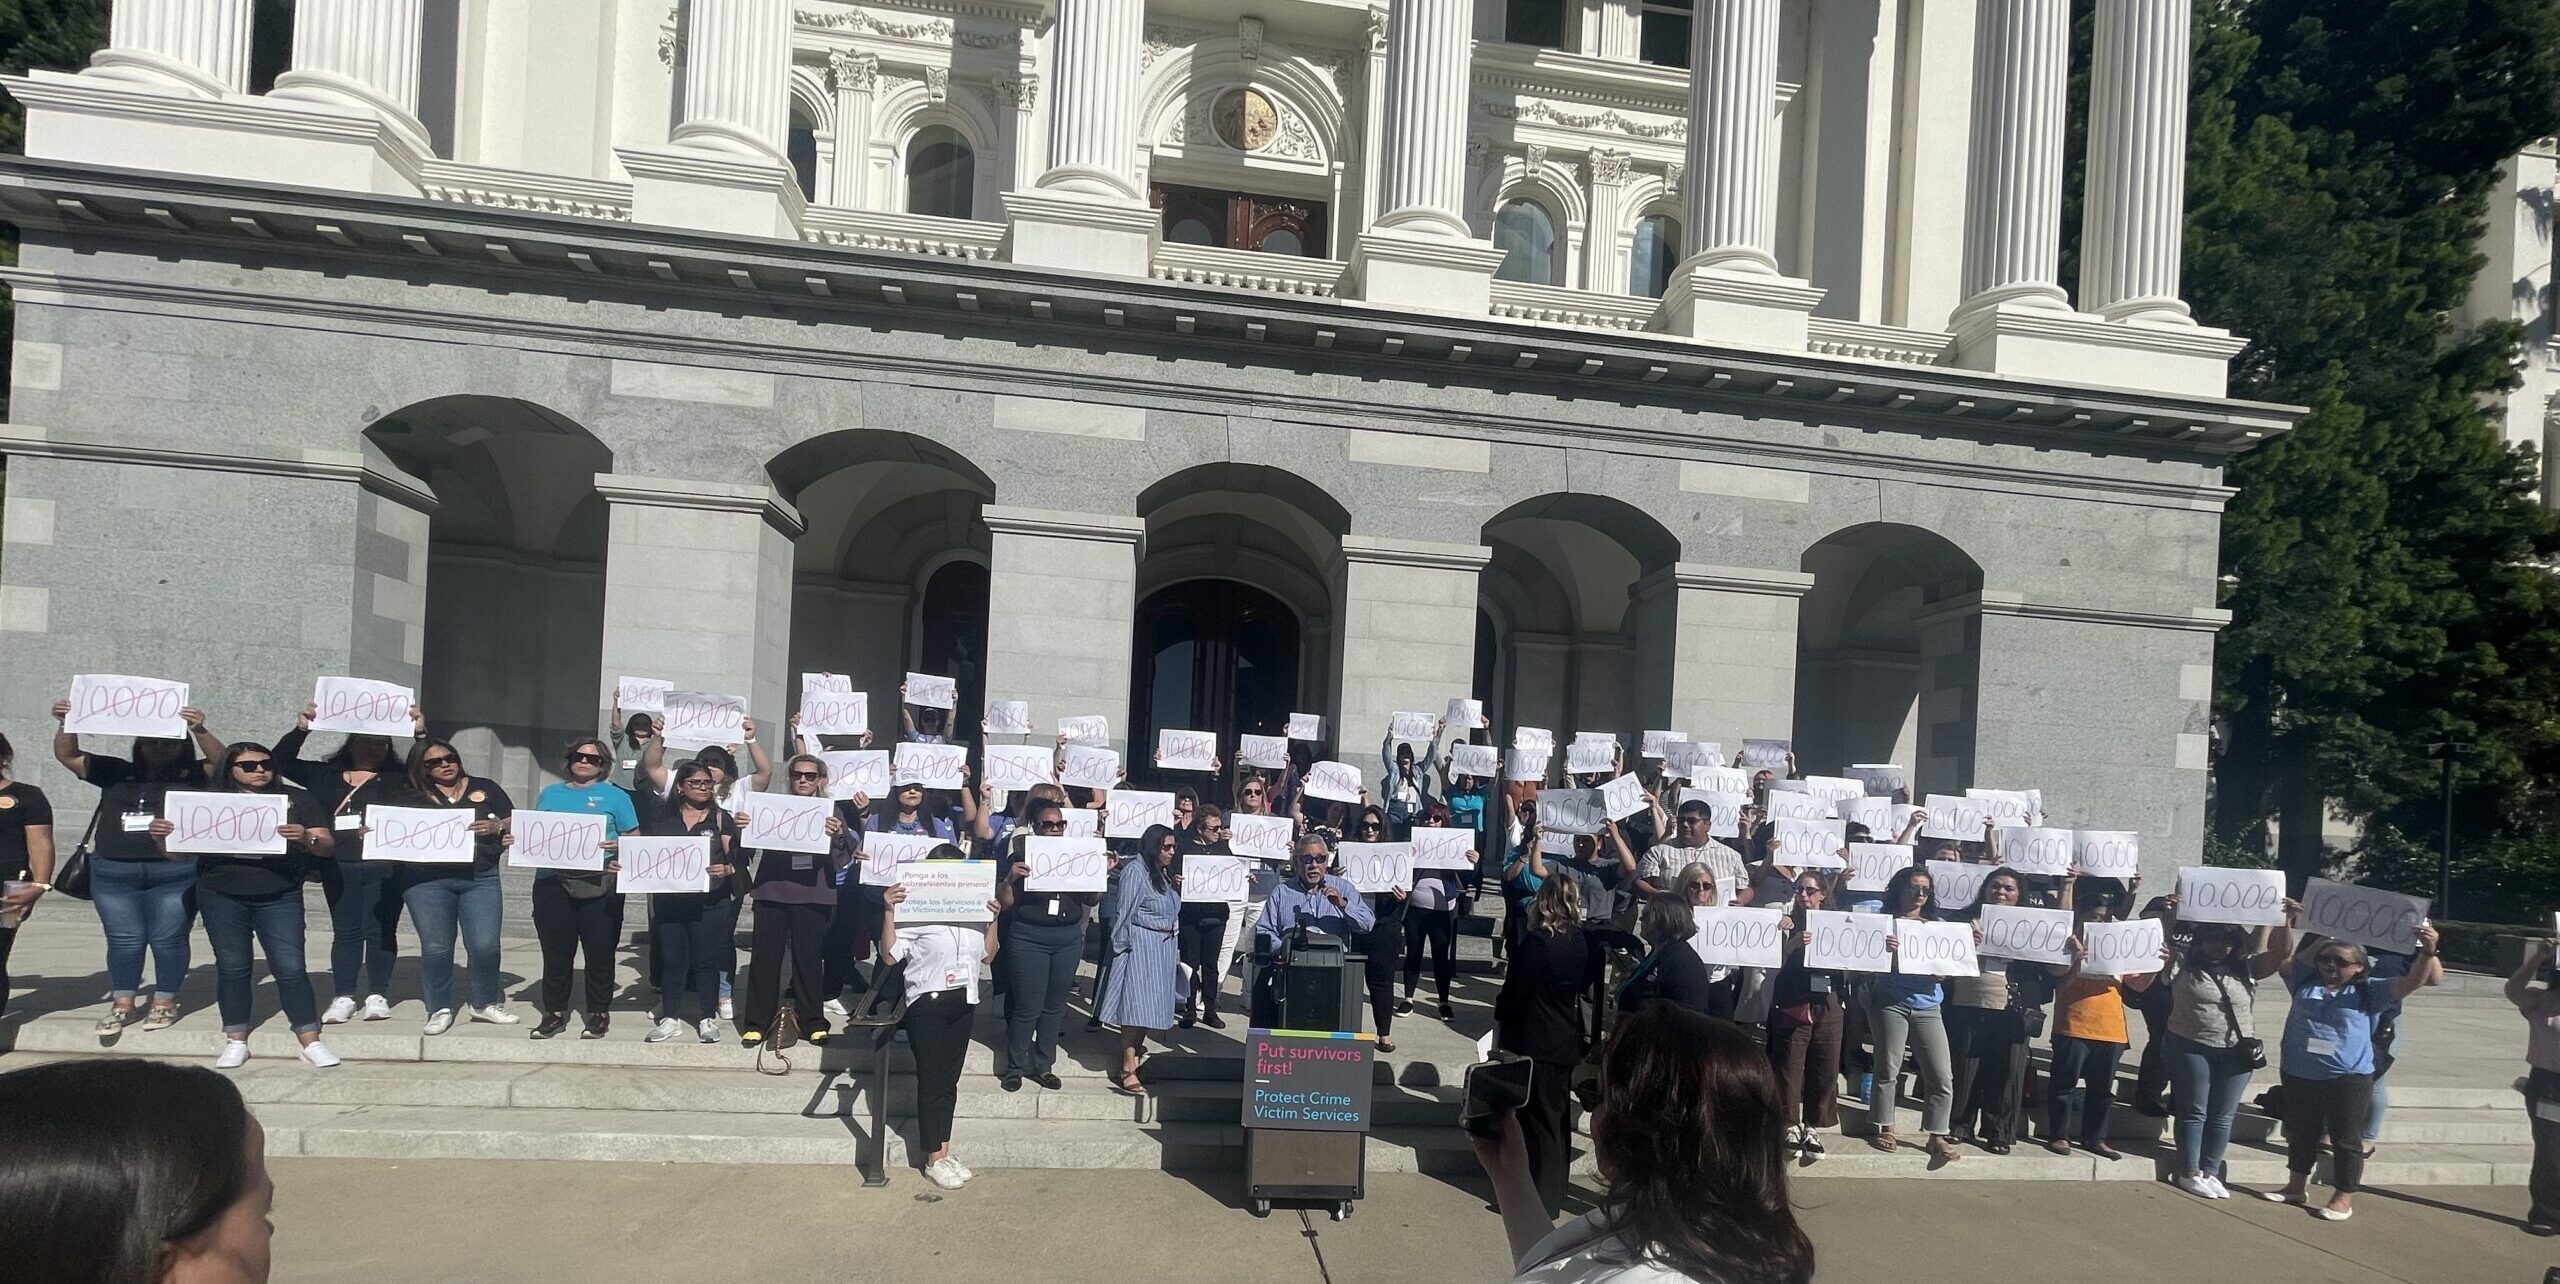 Photo of VALOR and the California Partnership to End Domestic Violence Rally. Participants are standing on the West Steps of the California Capitol holdings signs that show the number 10,000 crossed out in red ink.